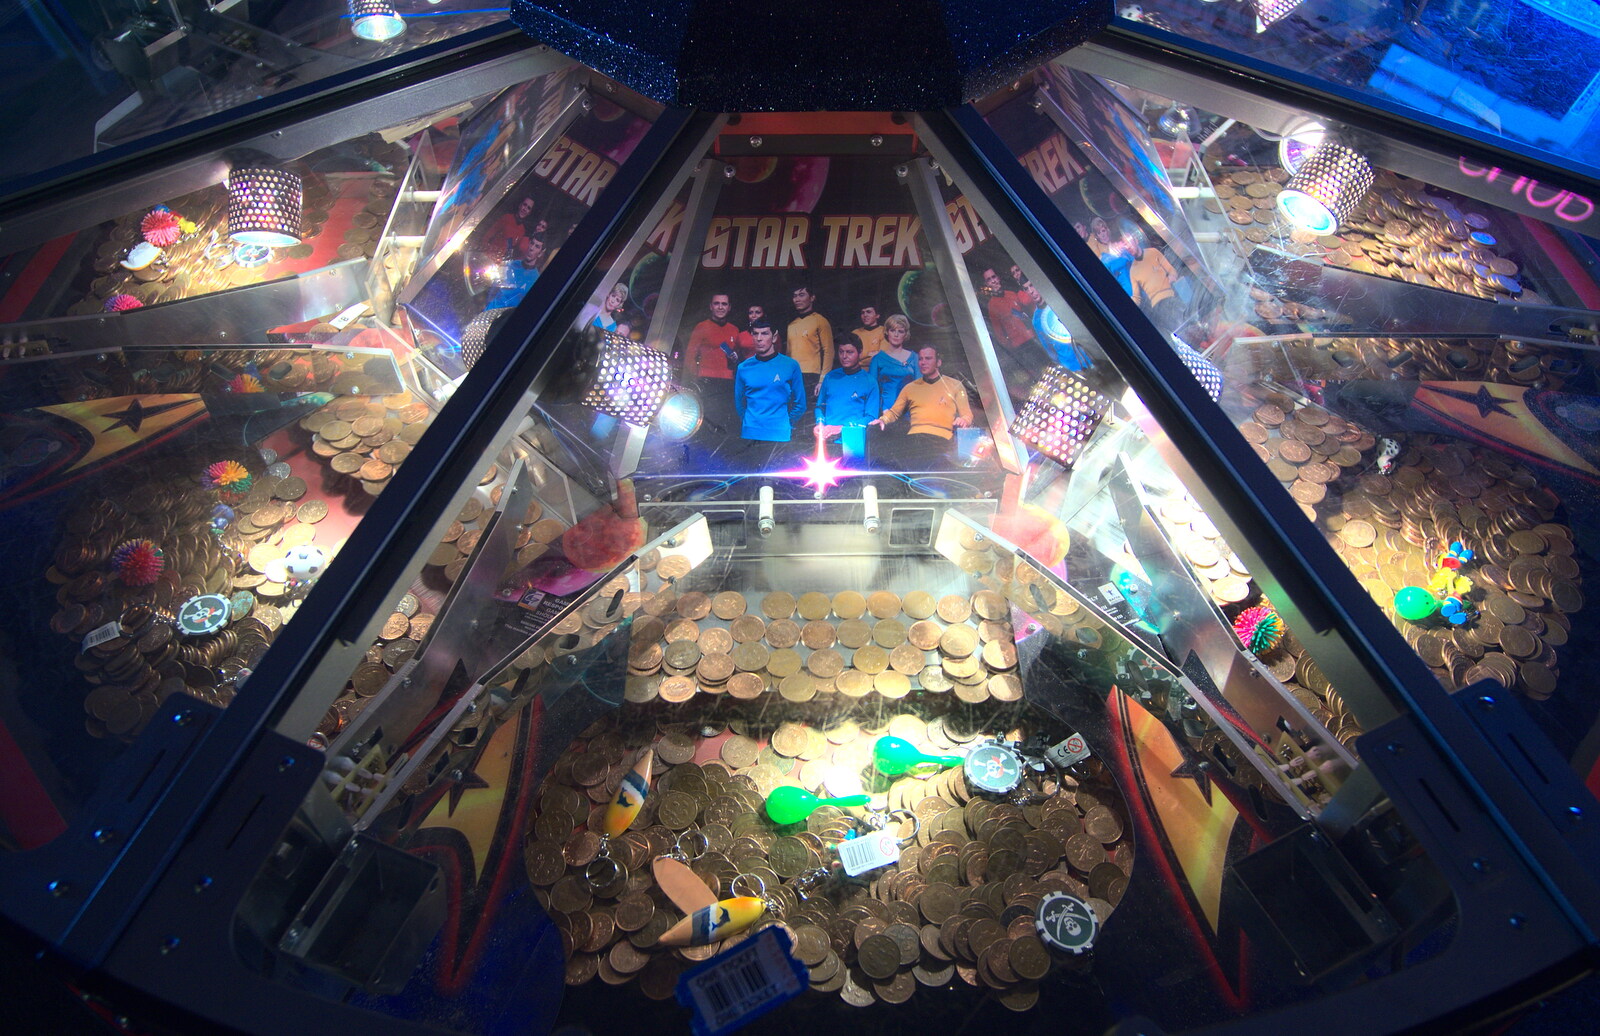 The Star Trek coin-push arcade machine from A Busy Day, Southwold and Thornham, Suffolk - 11th November 2012